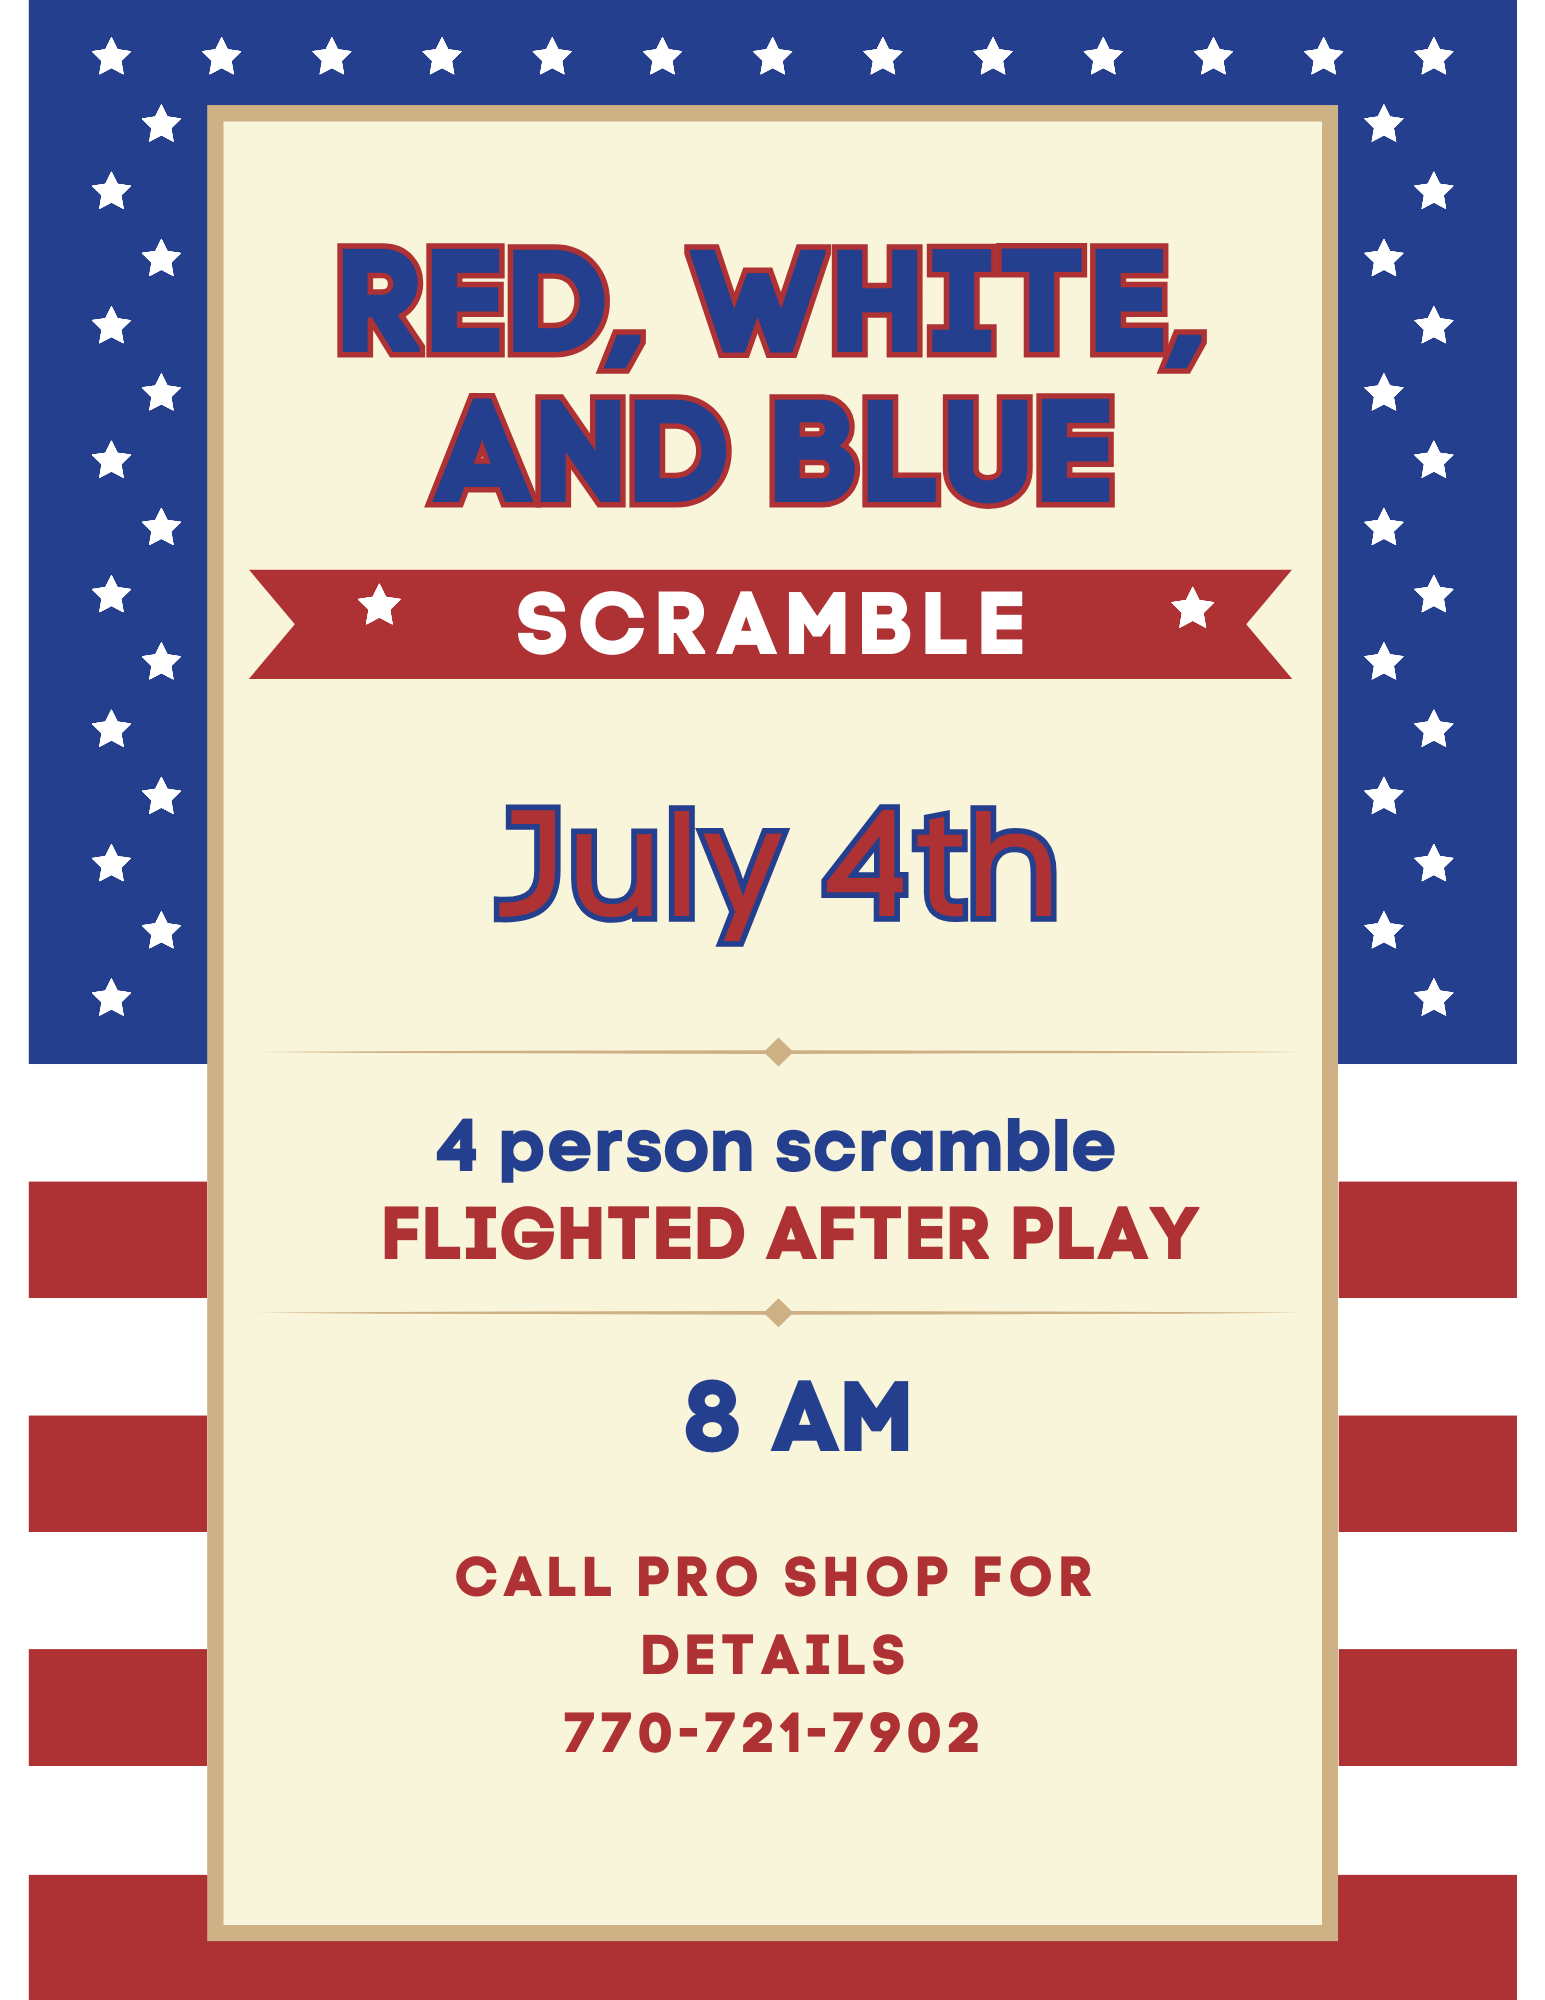 Red White and Blue Scramble July 4th